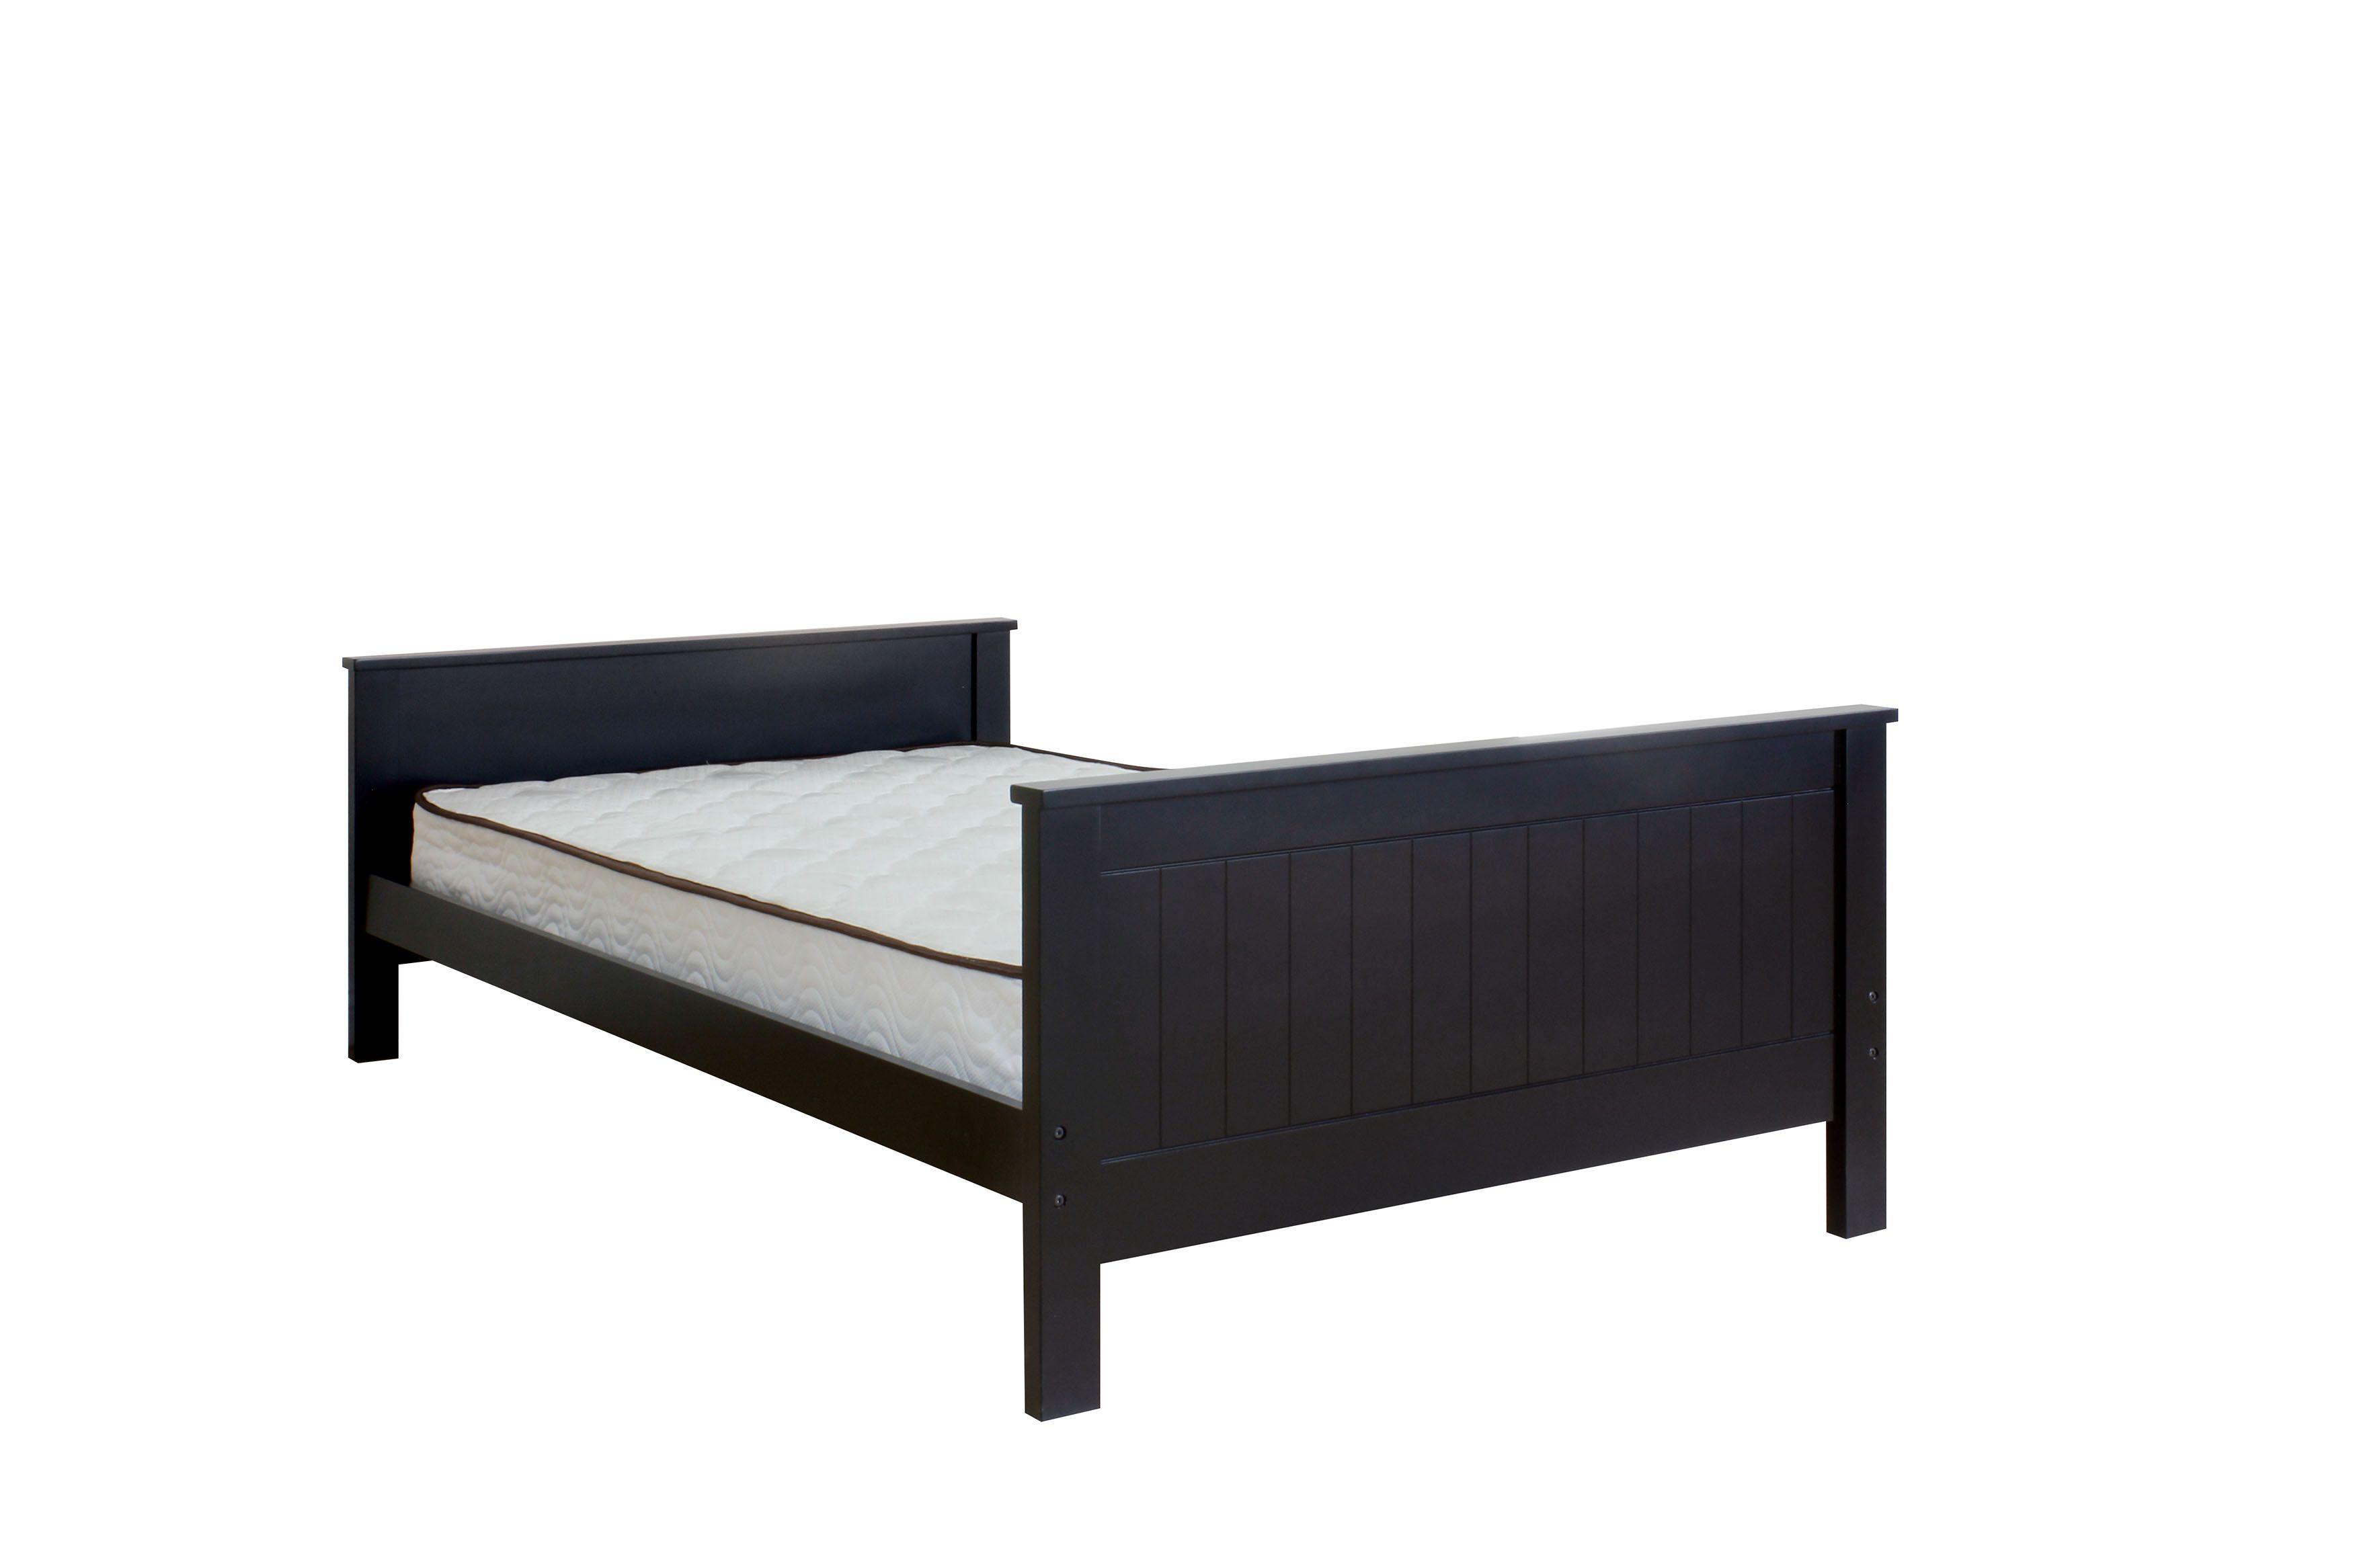 Transitional, Simple Twin Size Bed Willoughby 10988W in Black 